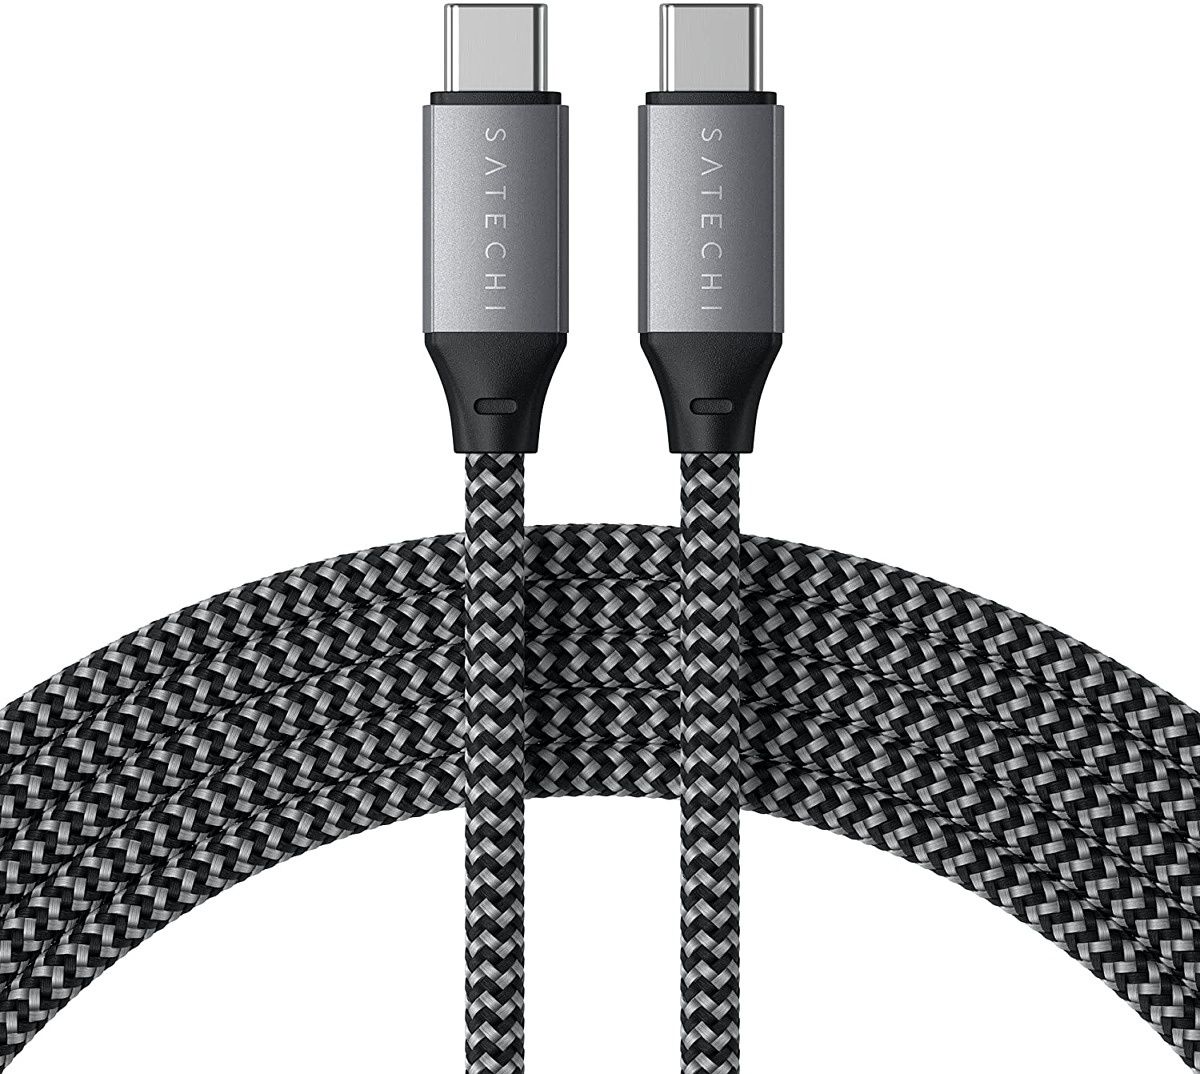 The Satechi cable is another great option for a 100W PD cable. It also supports USB 2.0 specifications. Moreover, the cable is double-braided for enhanced durability.